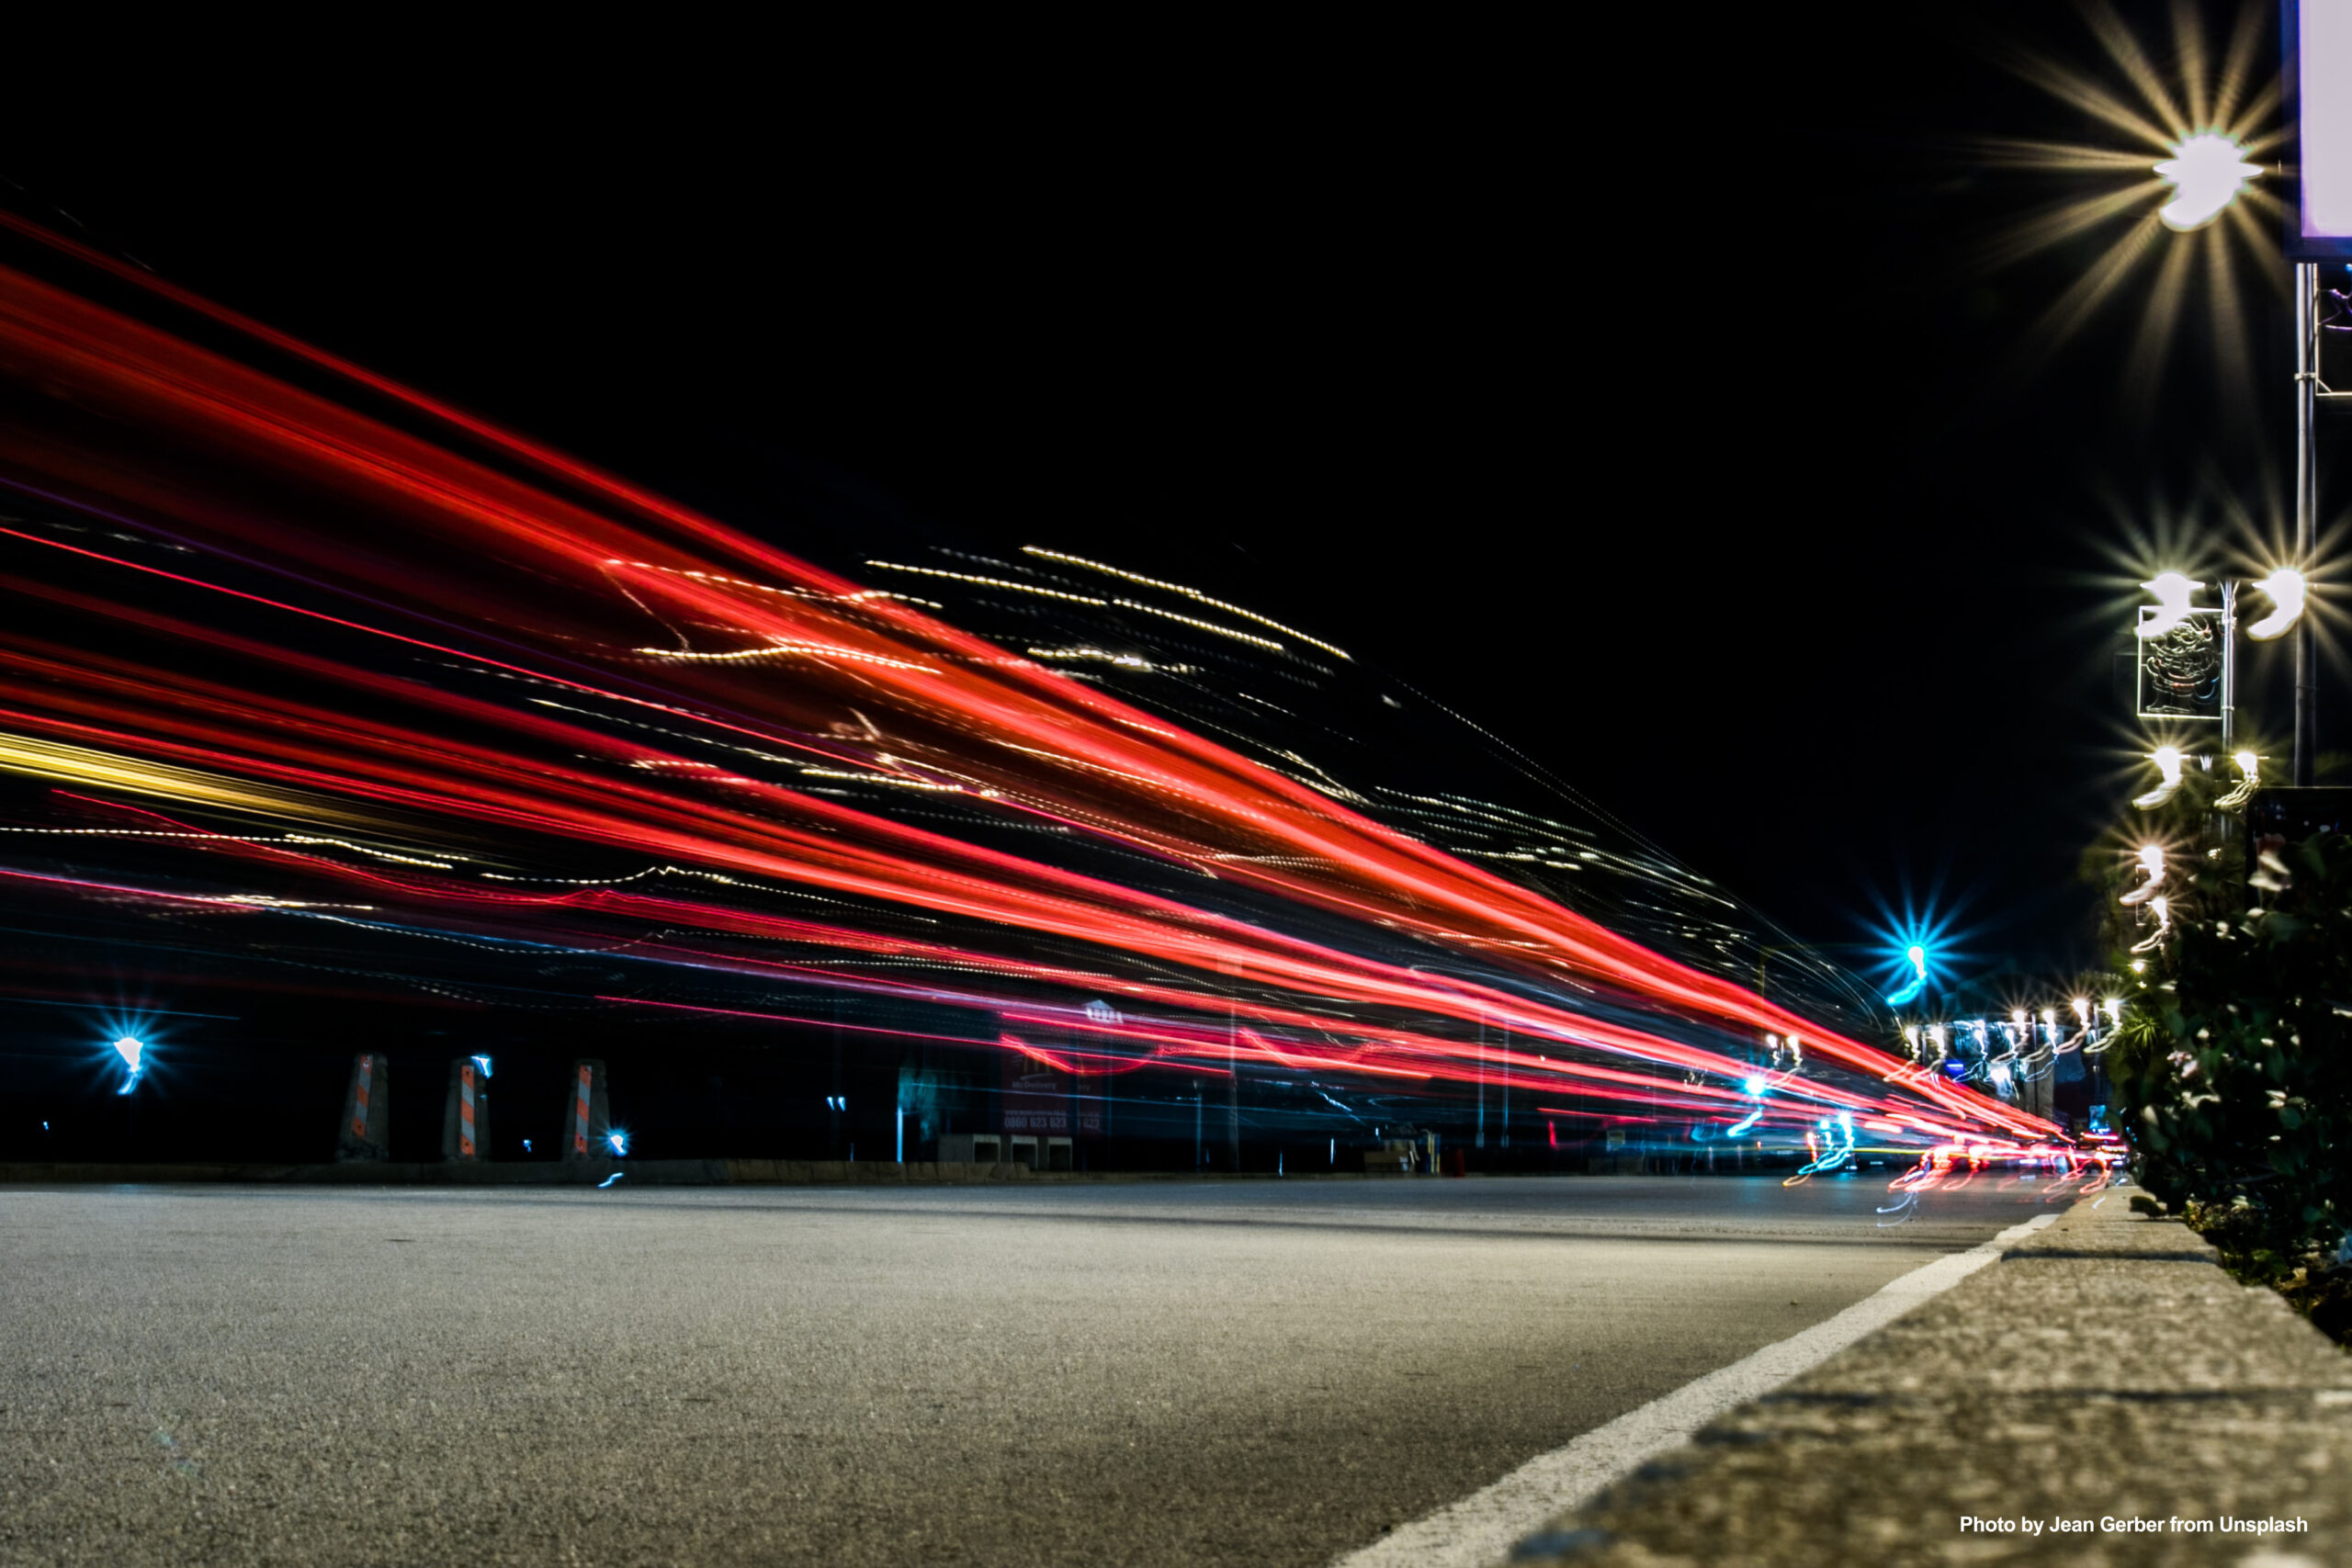 Img - Fast, Photo by Jean Gerber from Unsplash